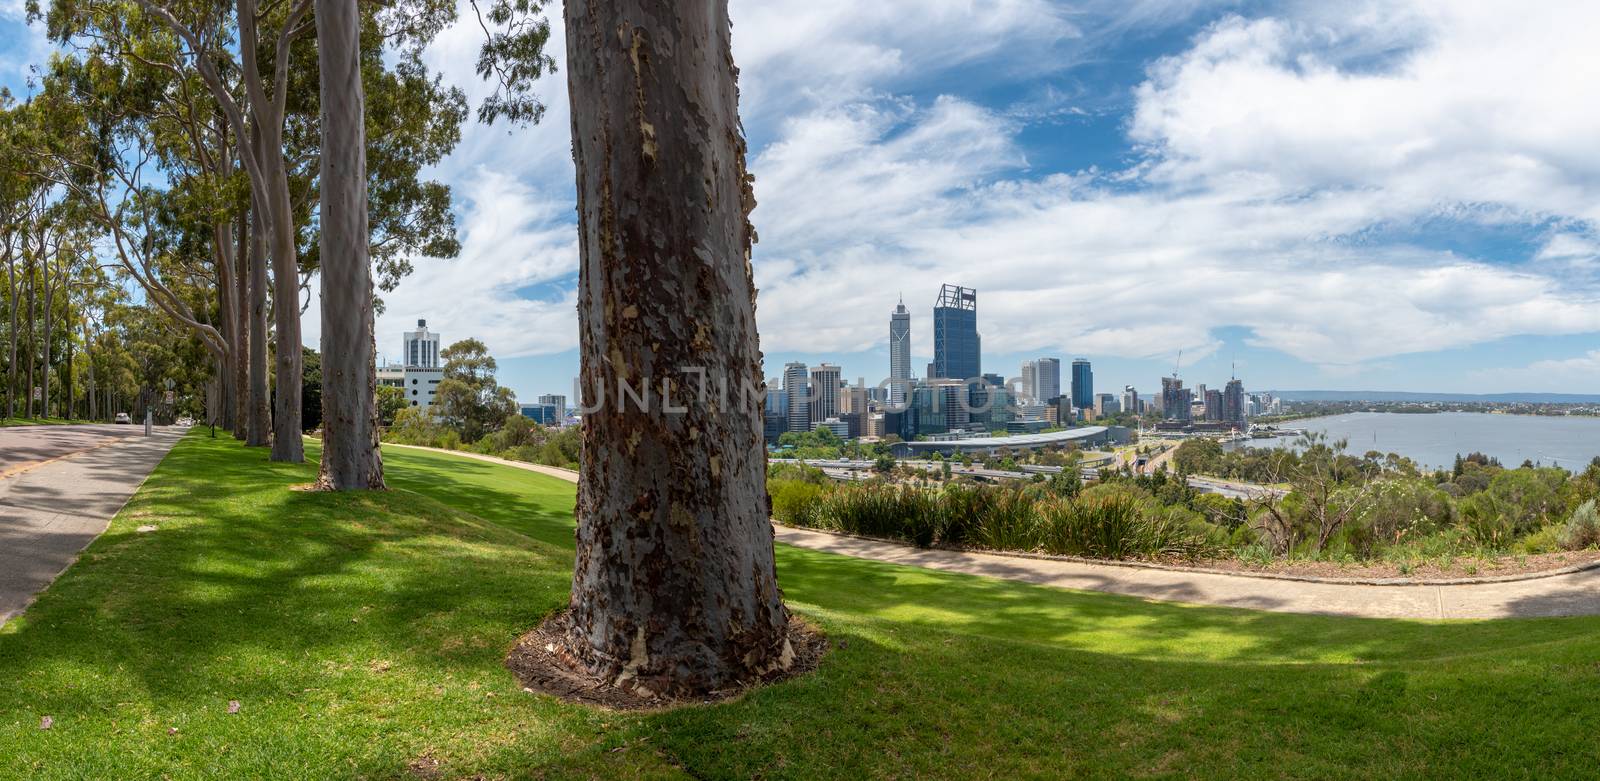 Panorama of Kingspark and Perth with trees and skyline by MXW_Stock